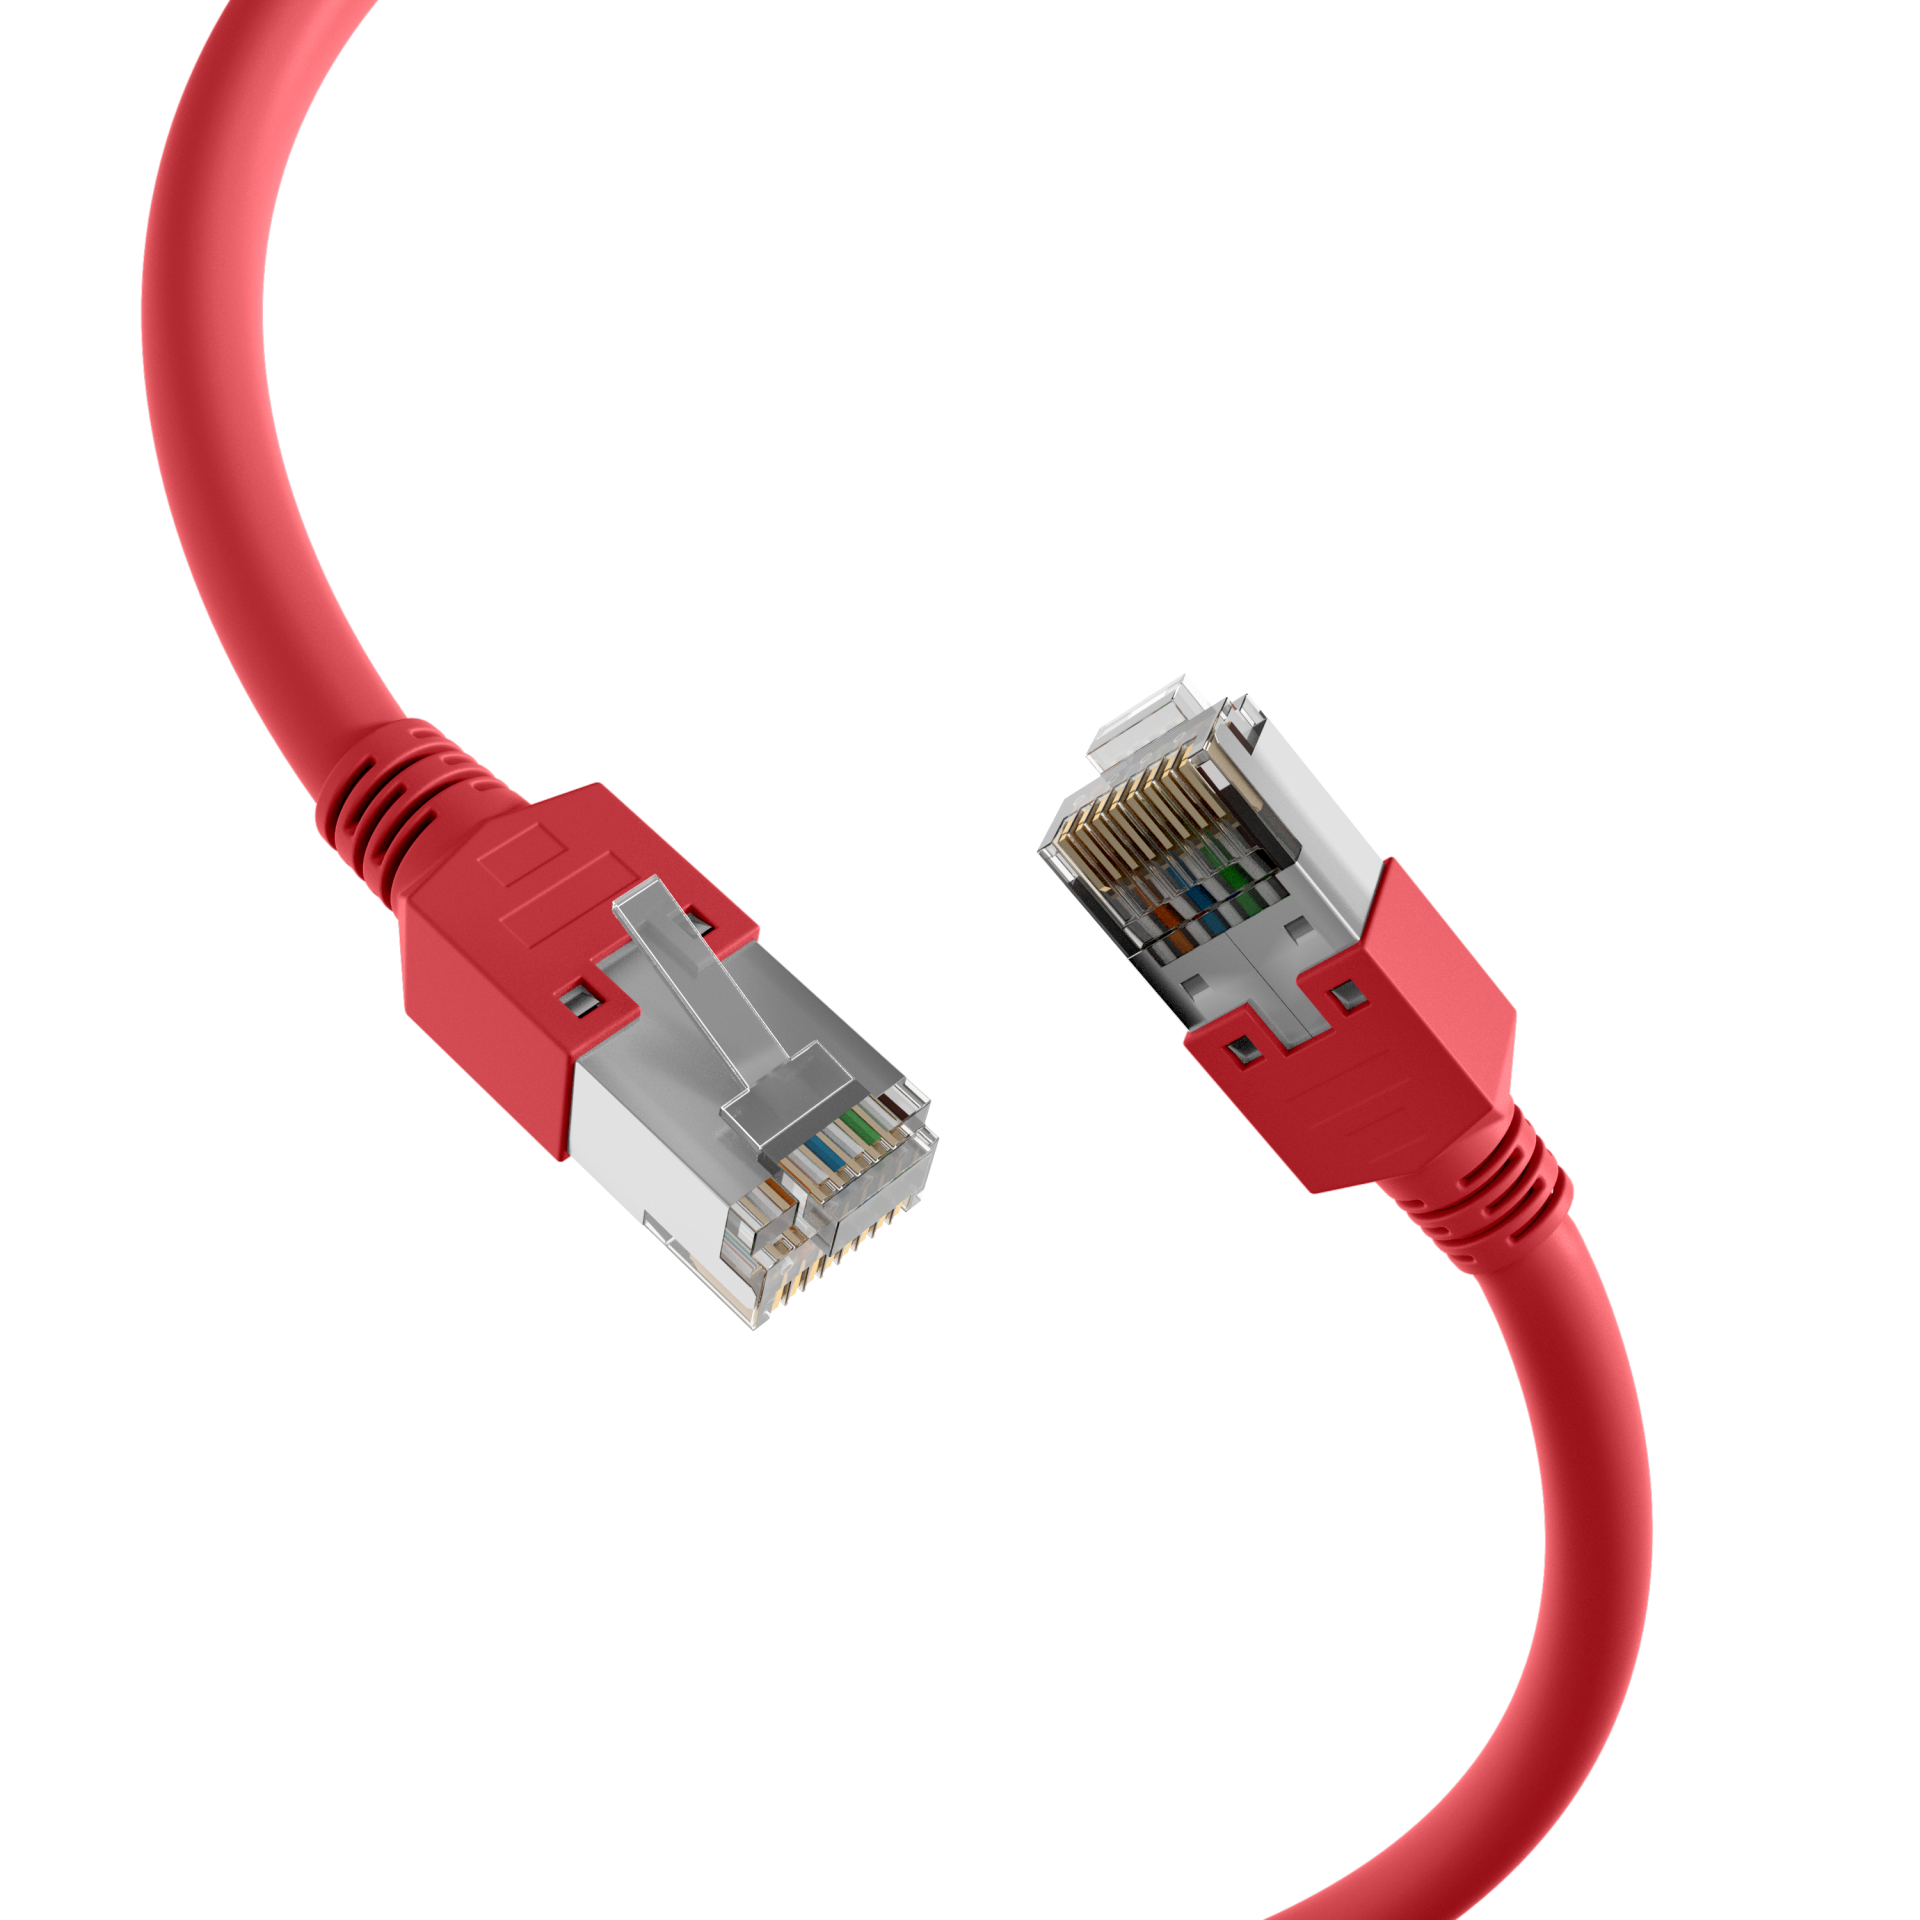 RJ45 Patch Cord Cat.5e S/UTP PVCDätwyler 5502 TM11 red 10m